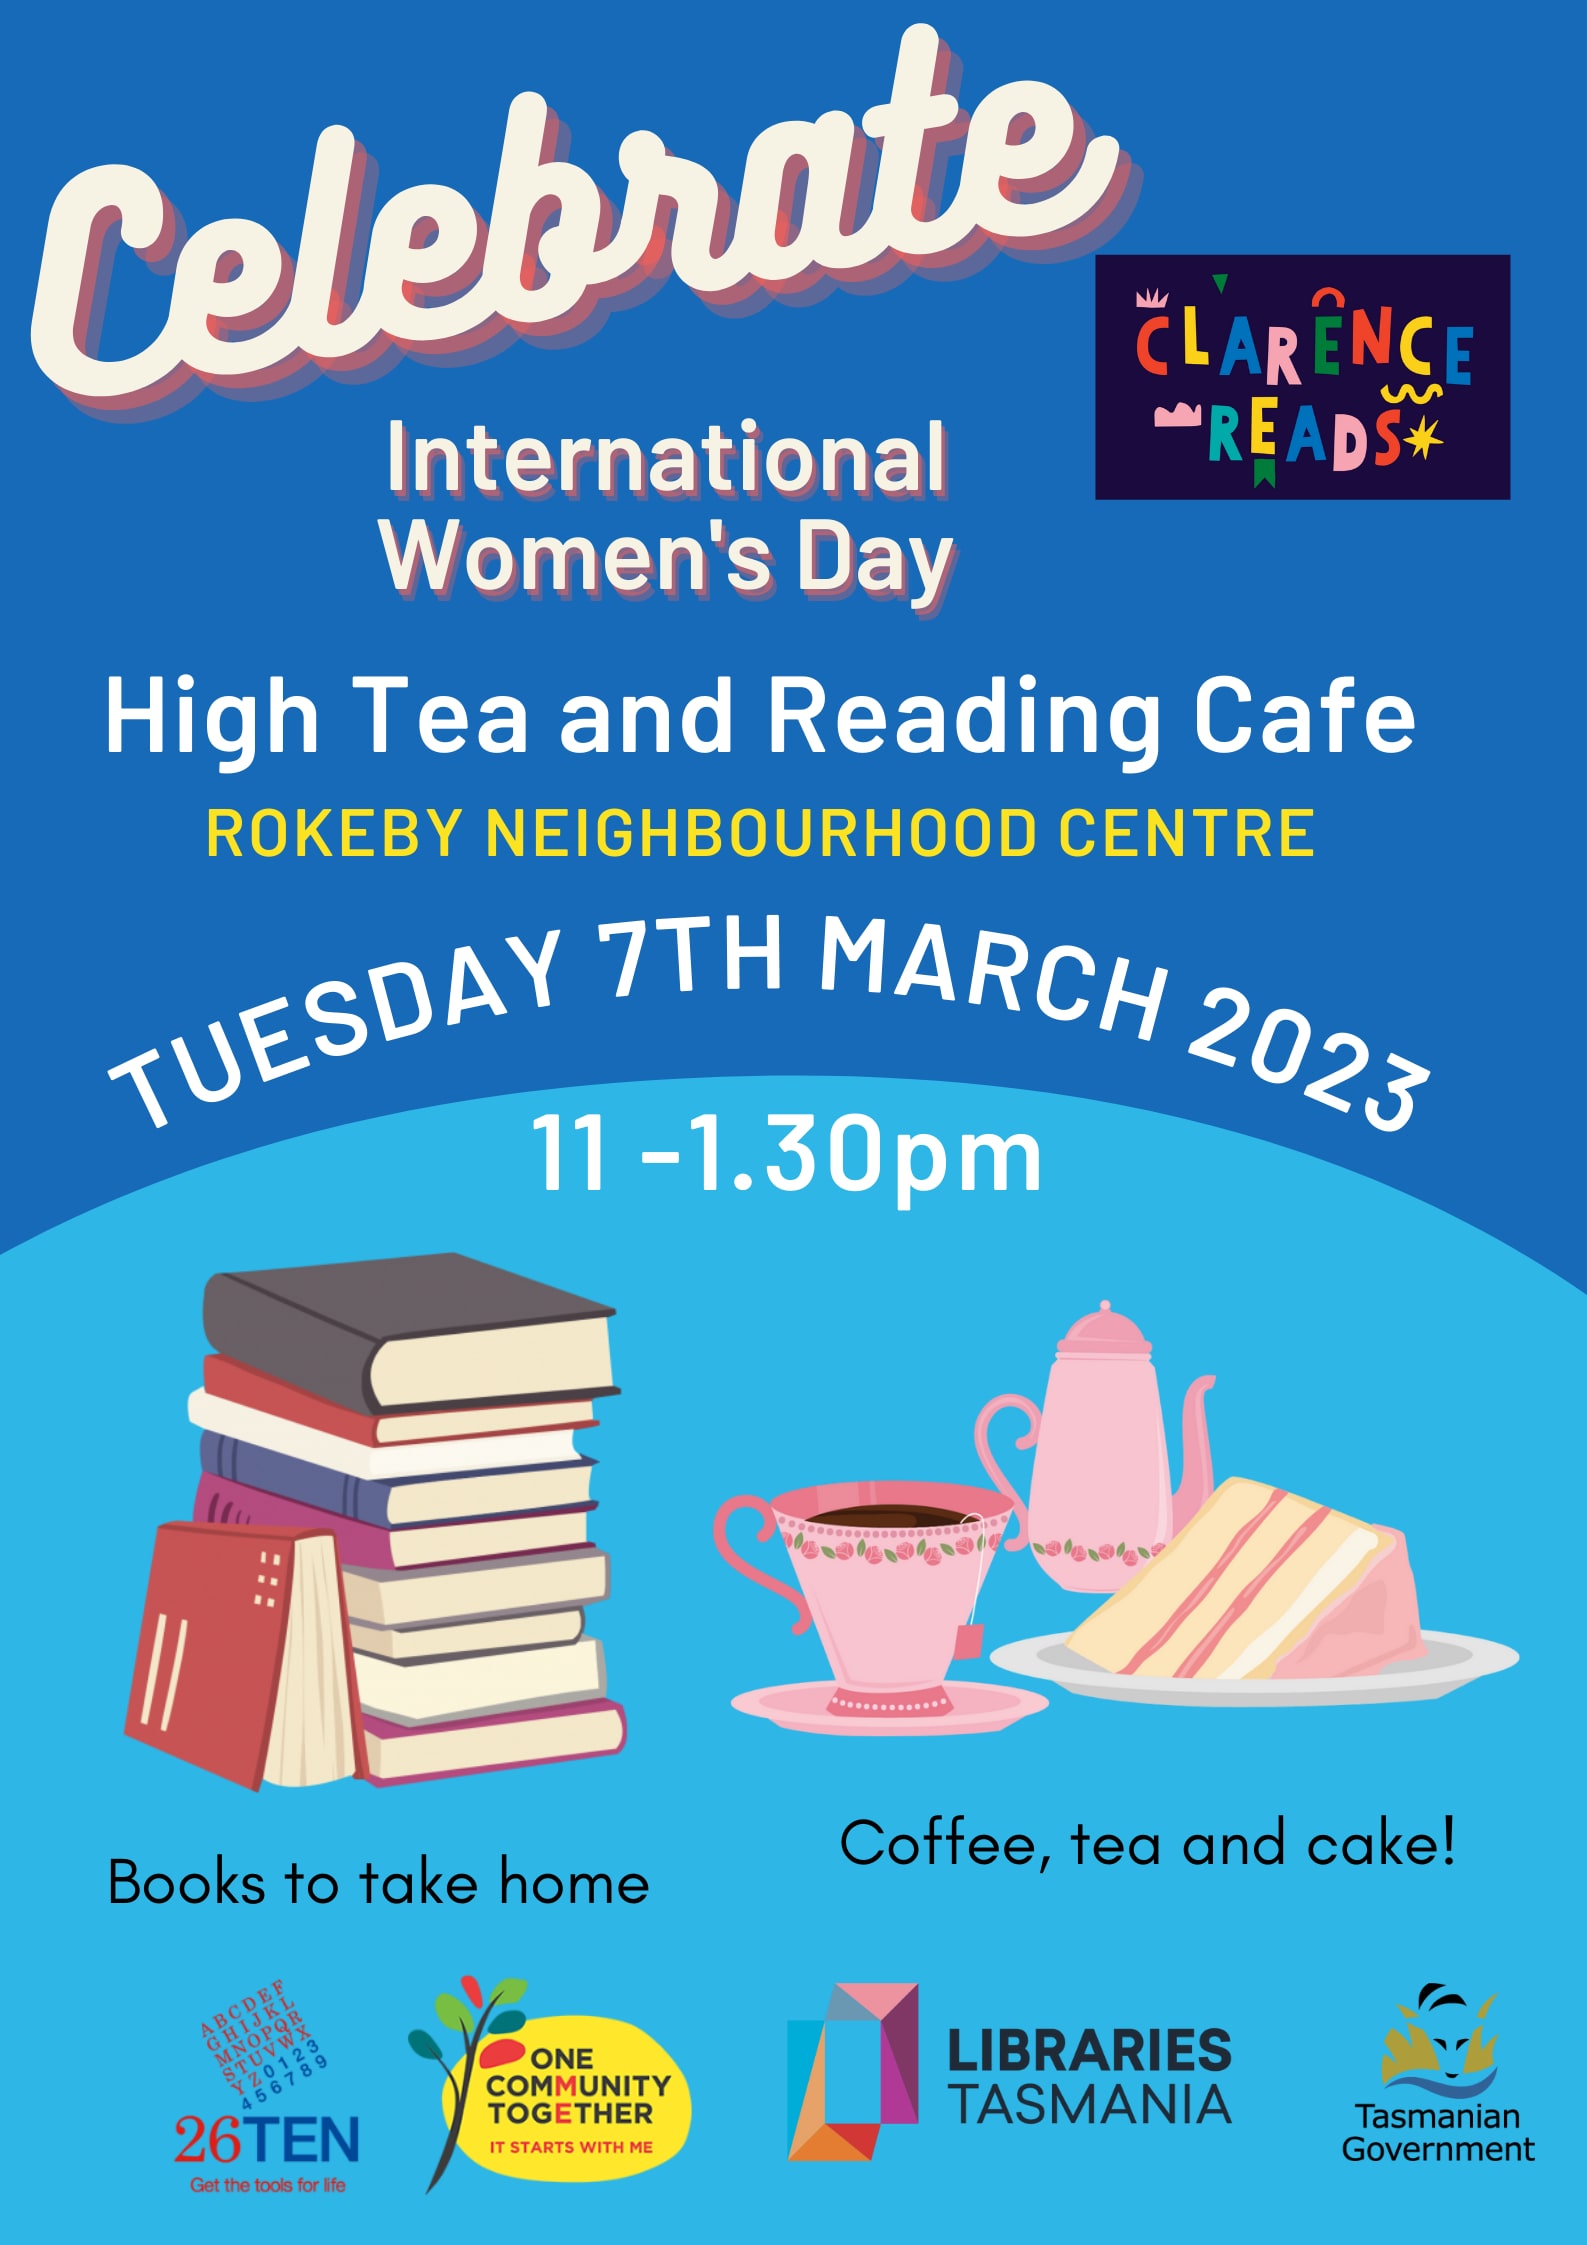 High Tea and Reading Cafe – One Community Together